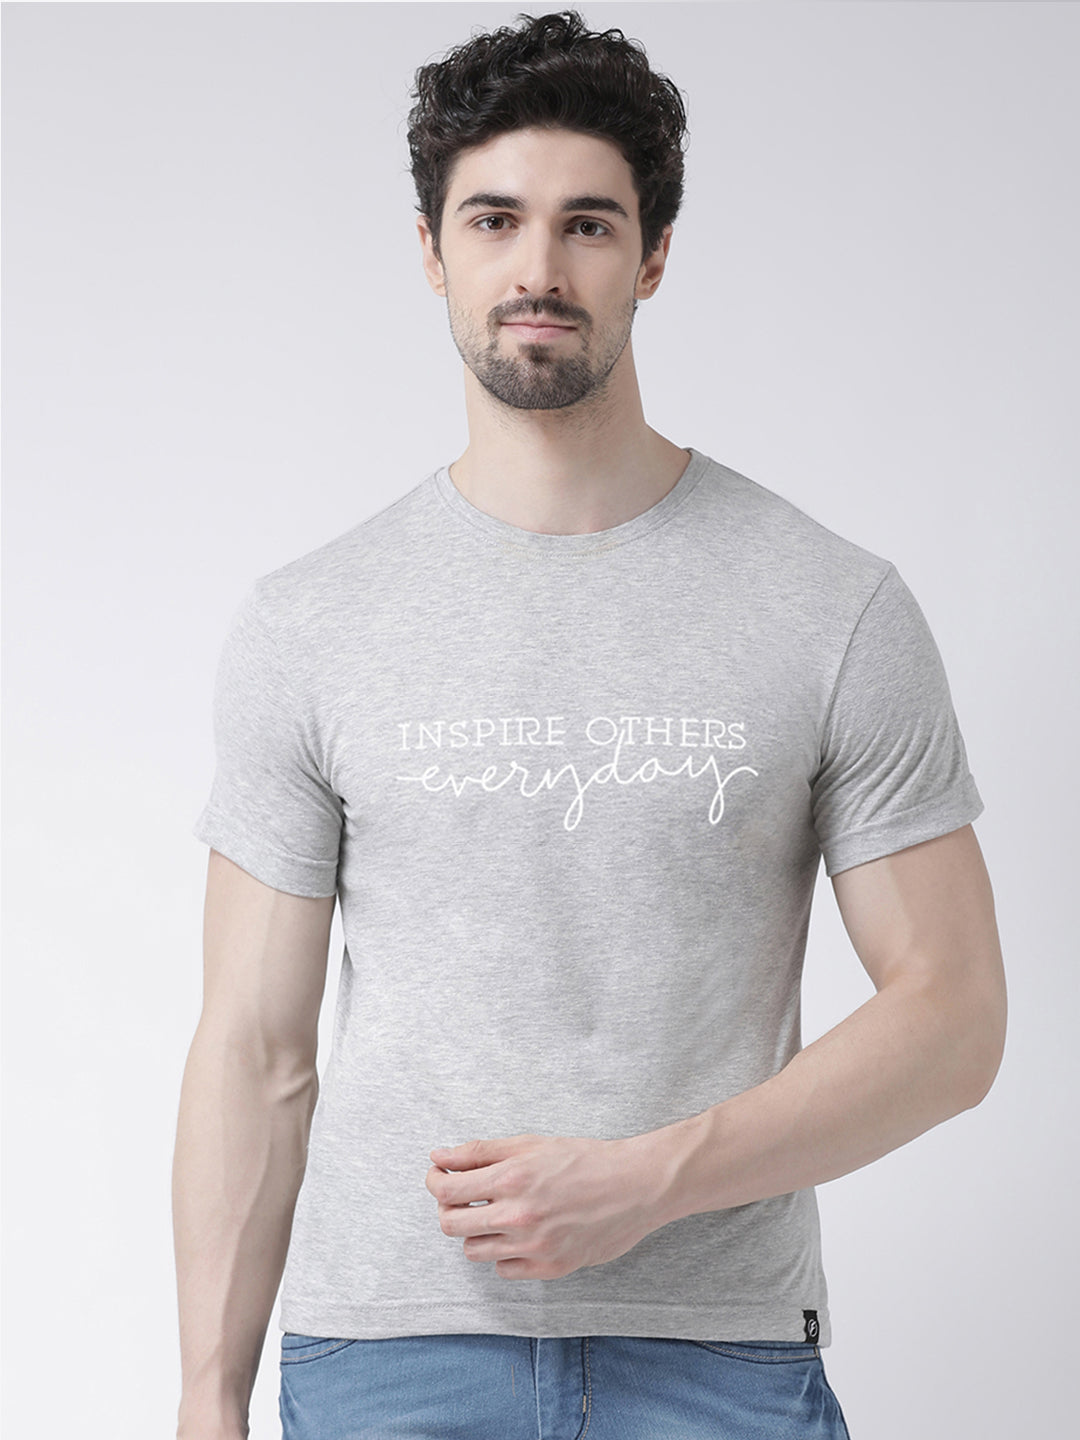 Inspiring Other Printed Round Neck T-shirt - Friskers